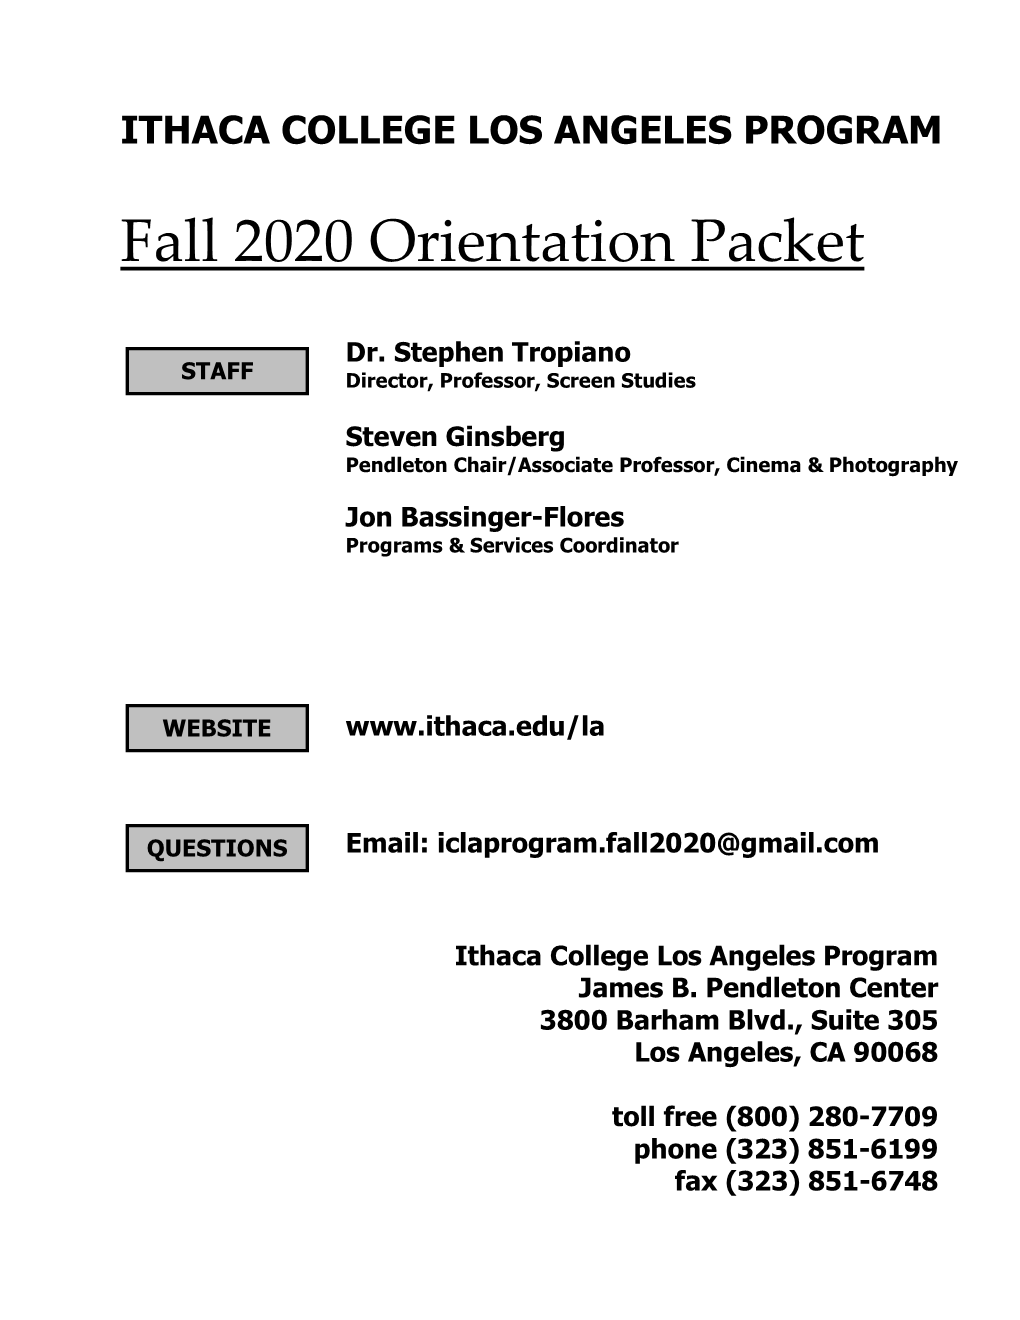 Fall 2020 Orientation Packet